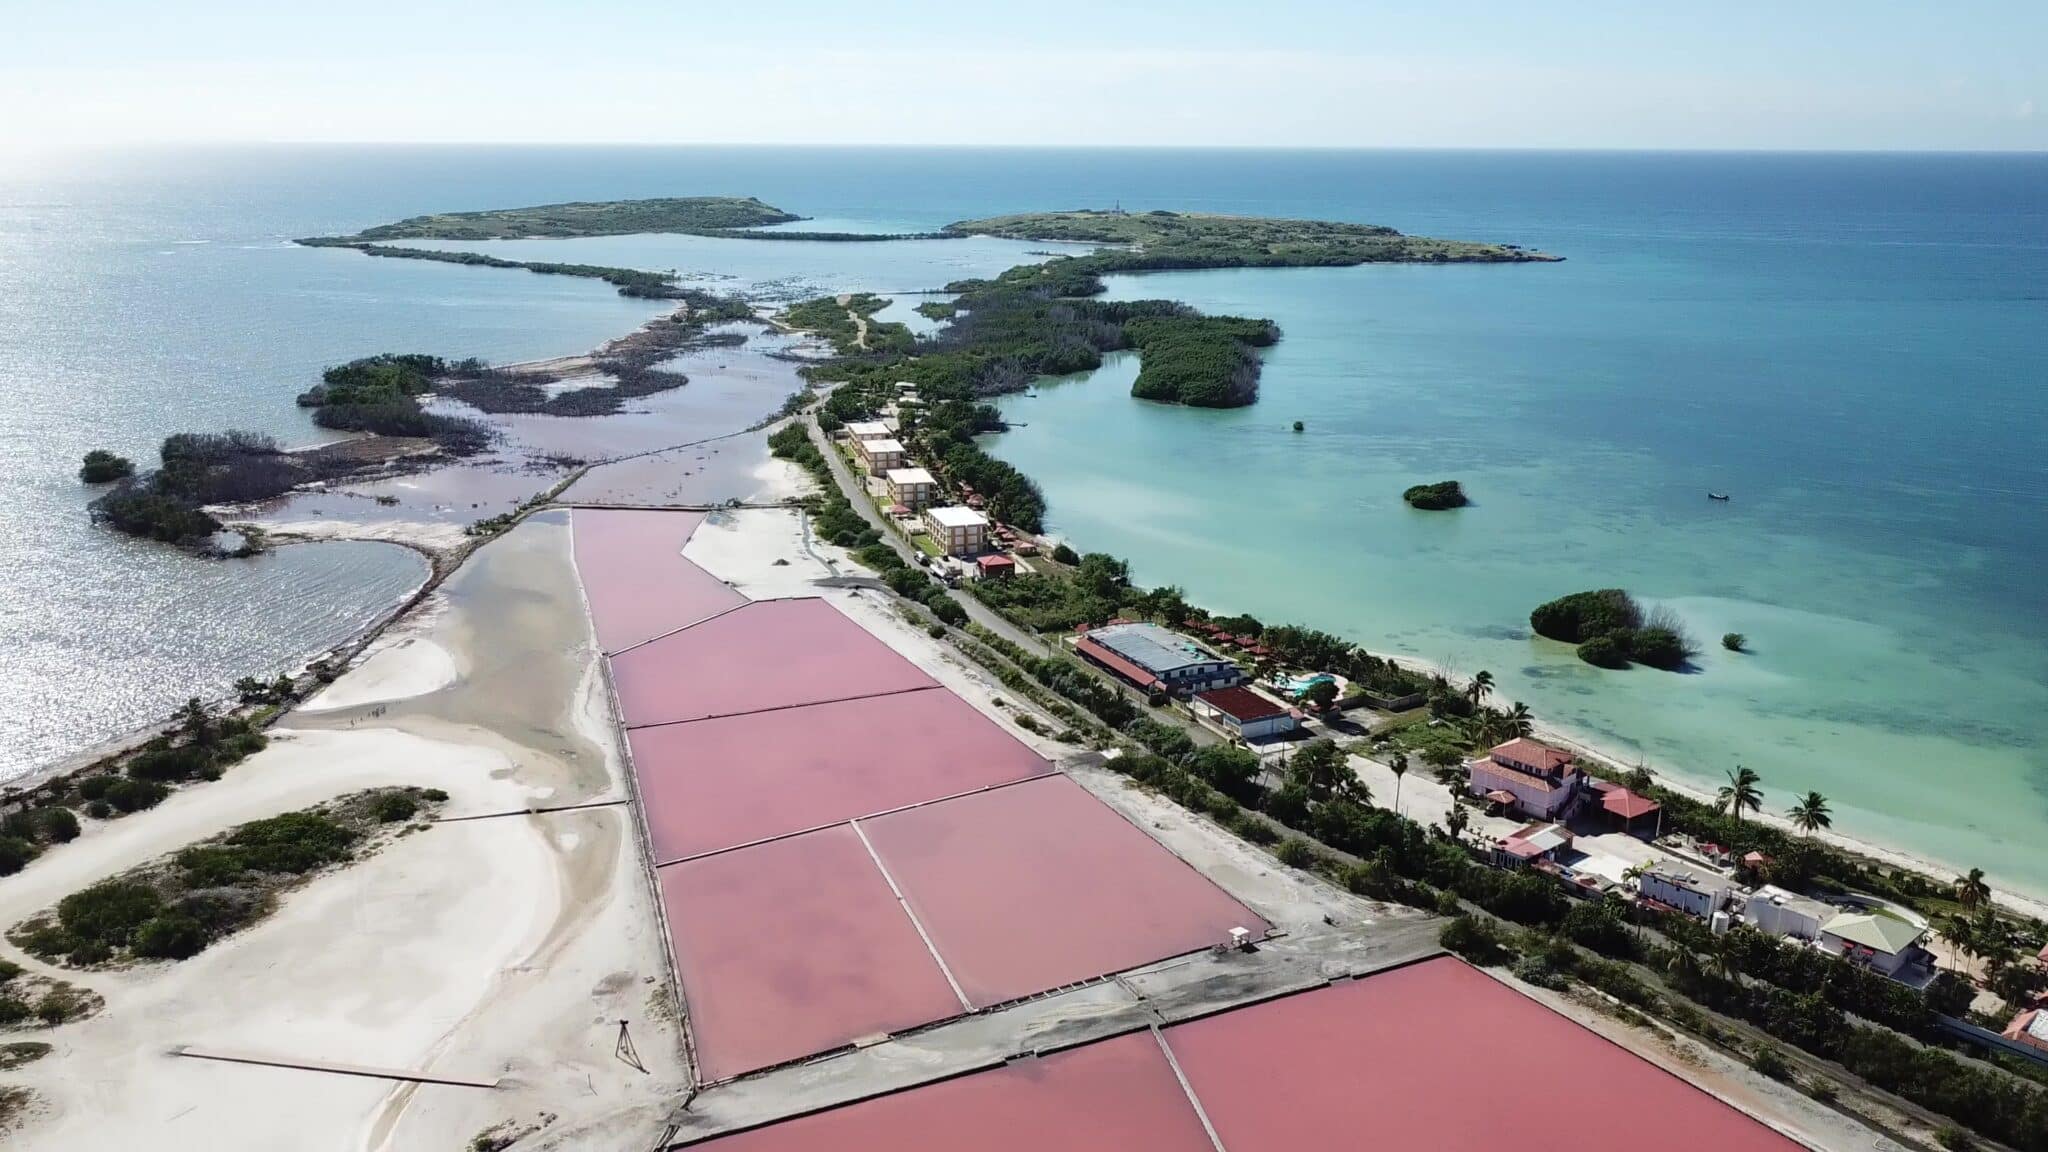 Pink ponds surrounded by sea on boths sides